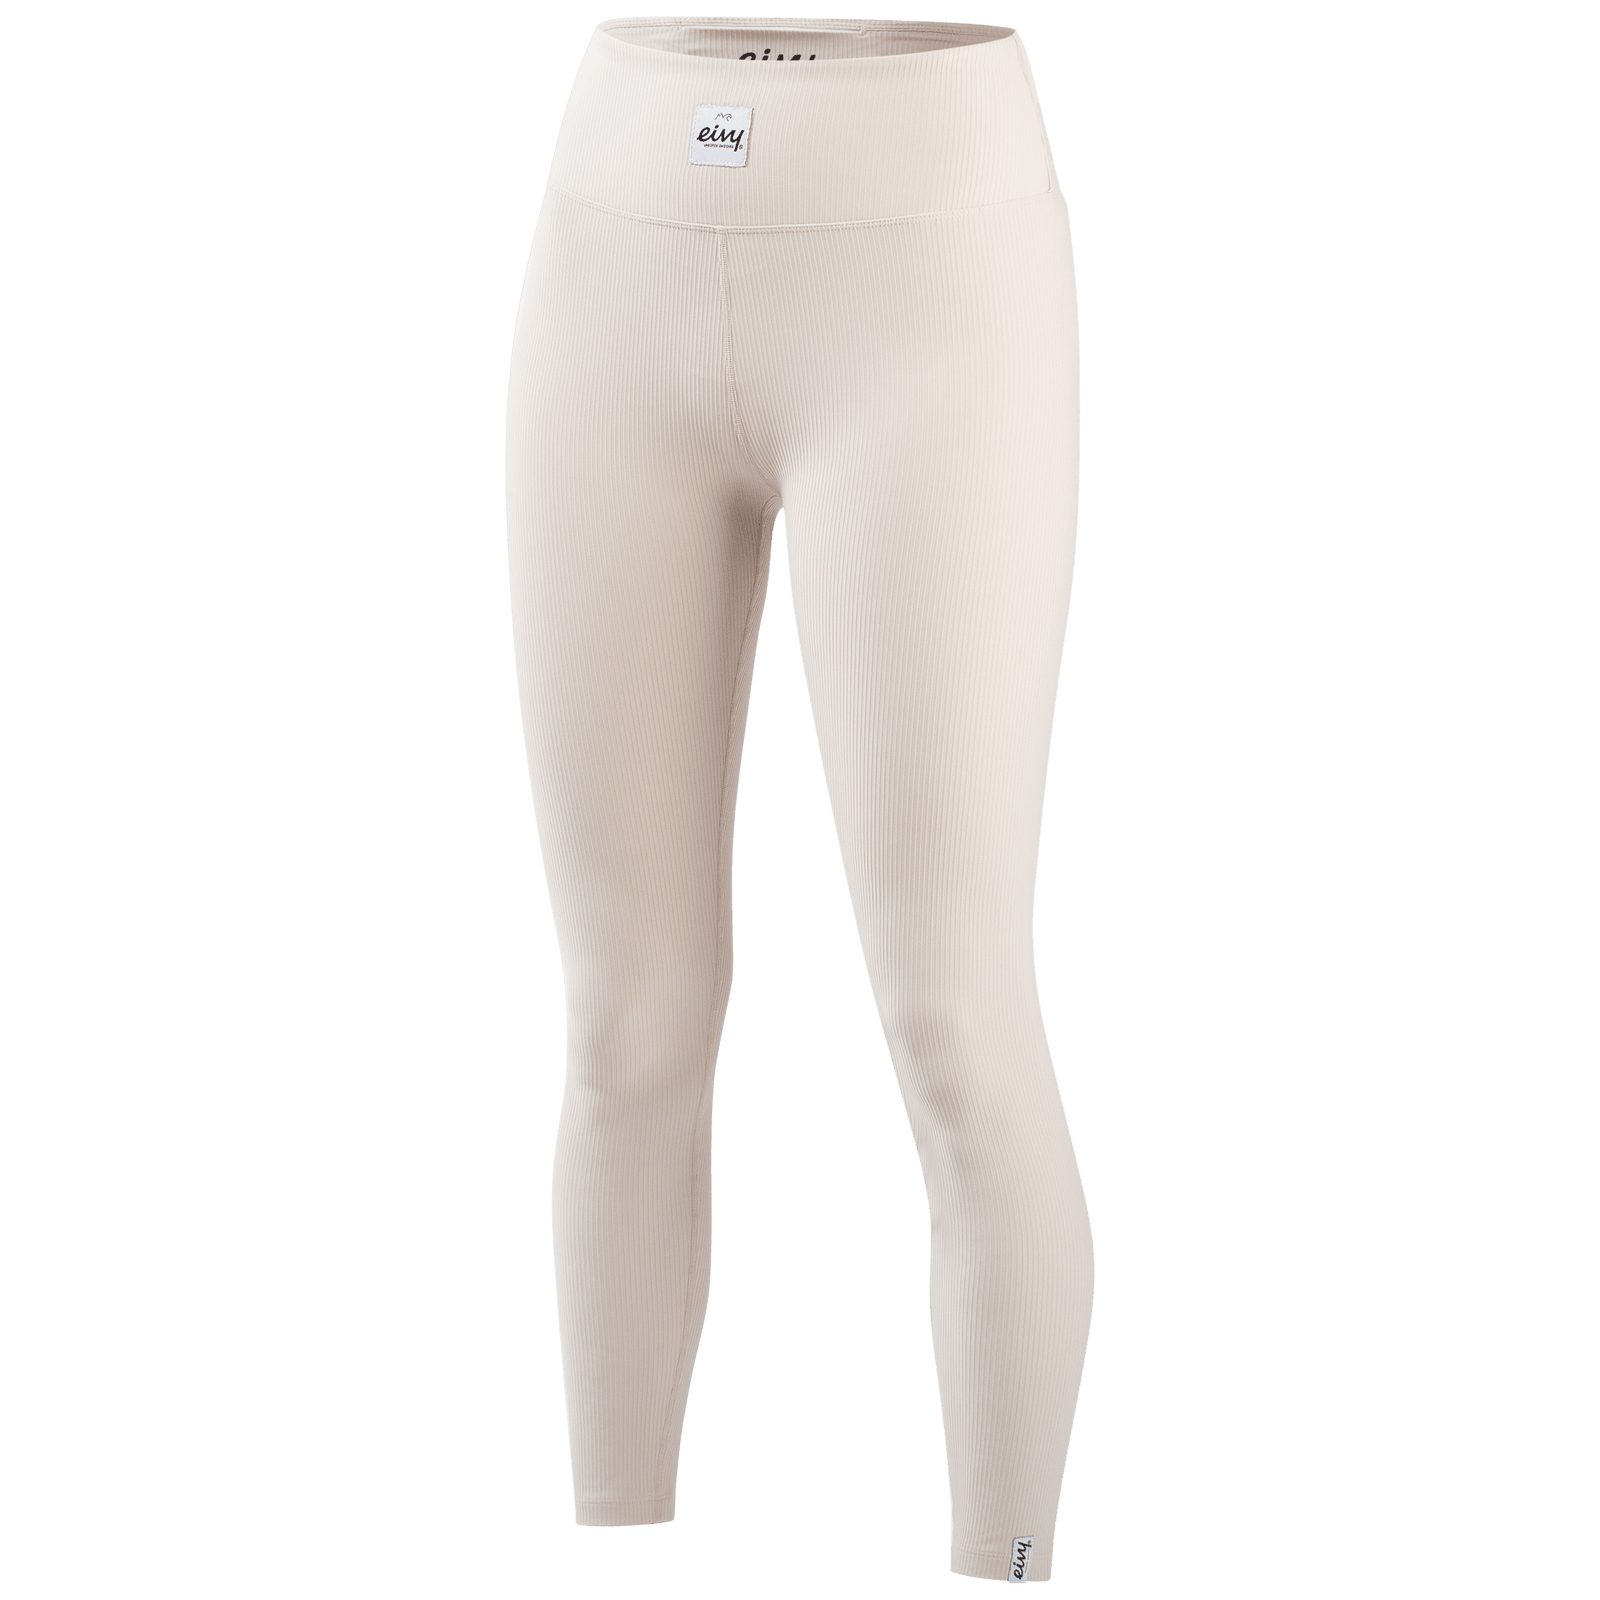 Base layer short tights in color white